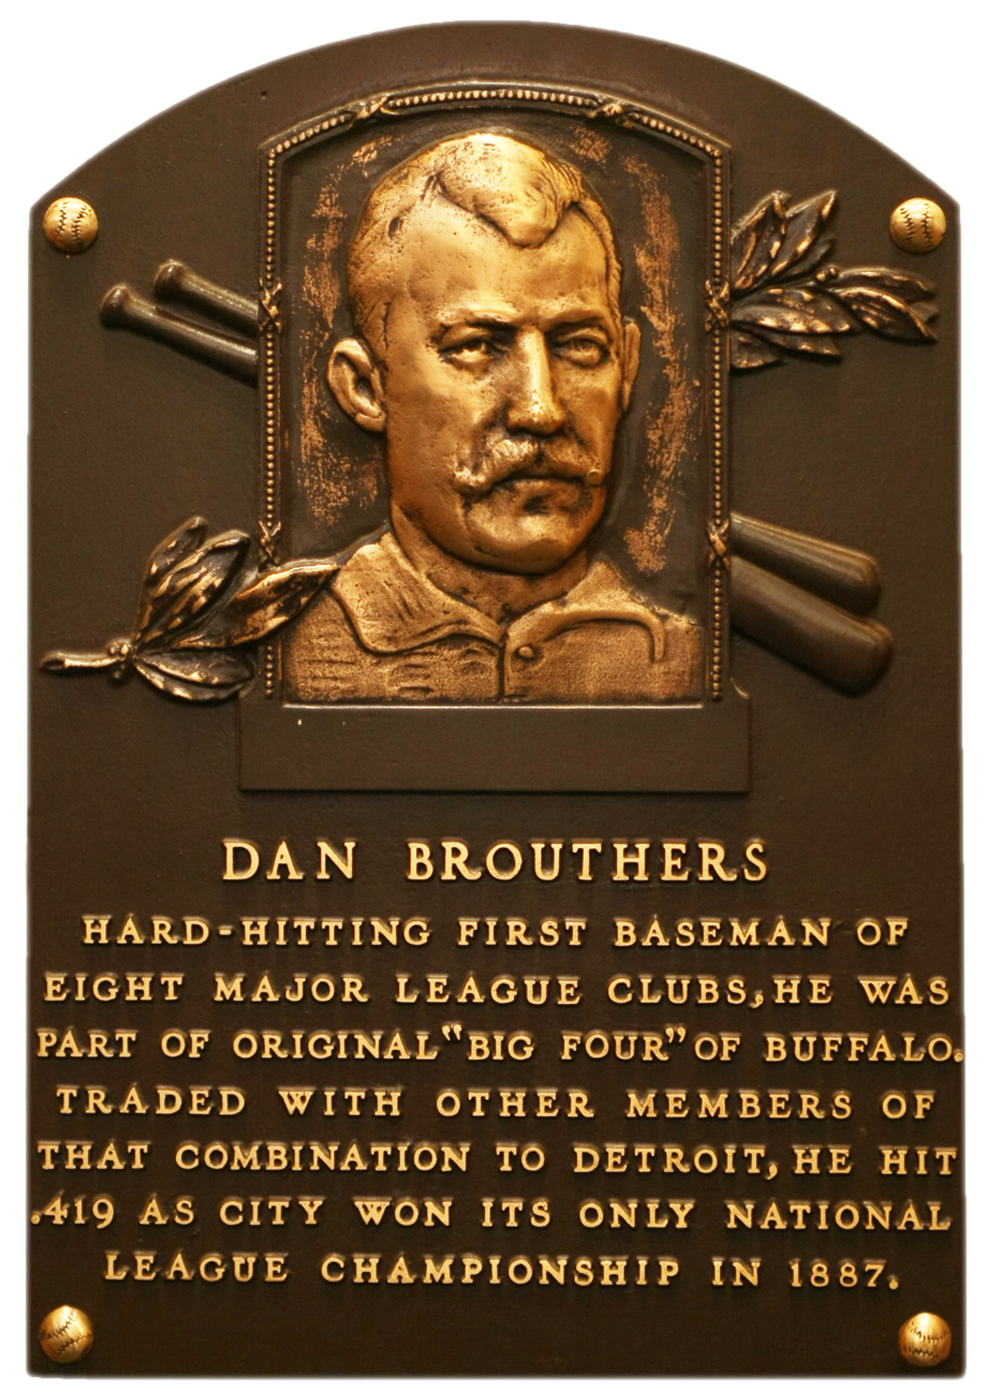 Dan Brouthers Hall of Fame plaque